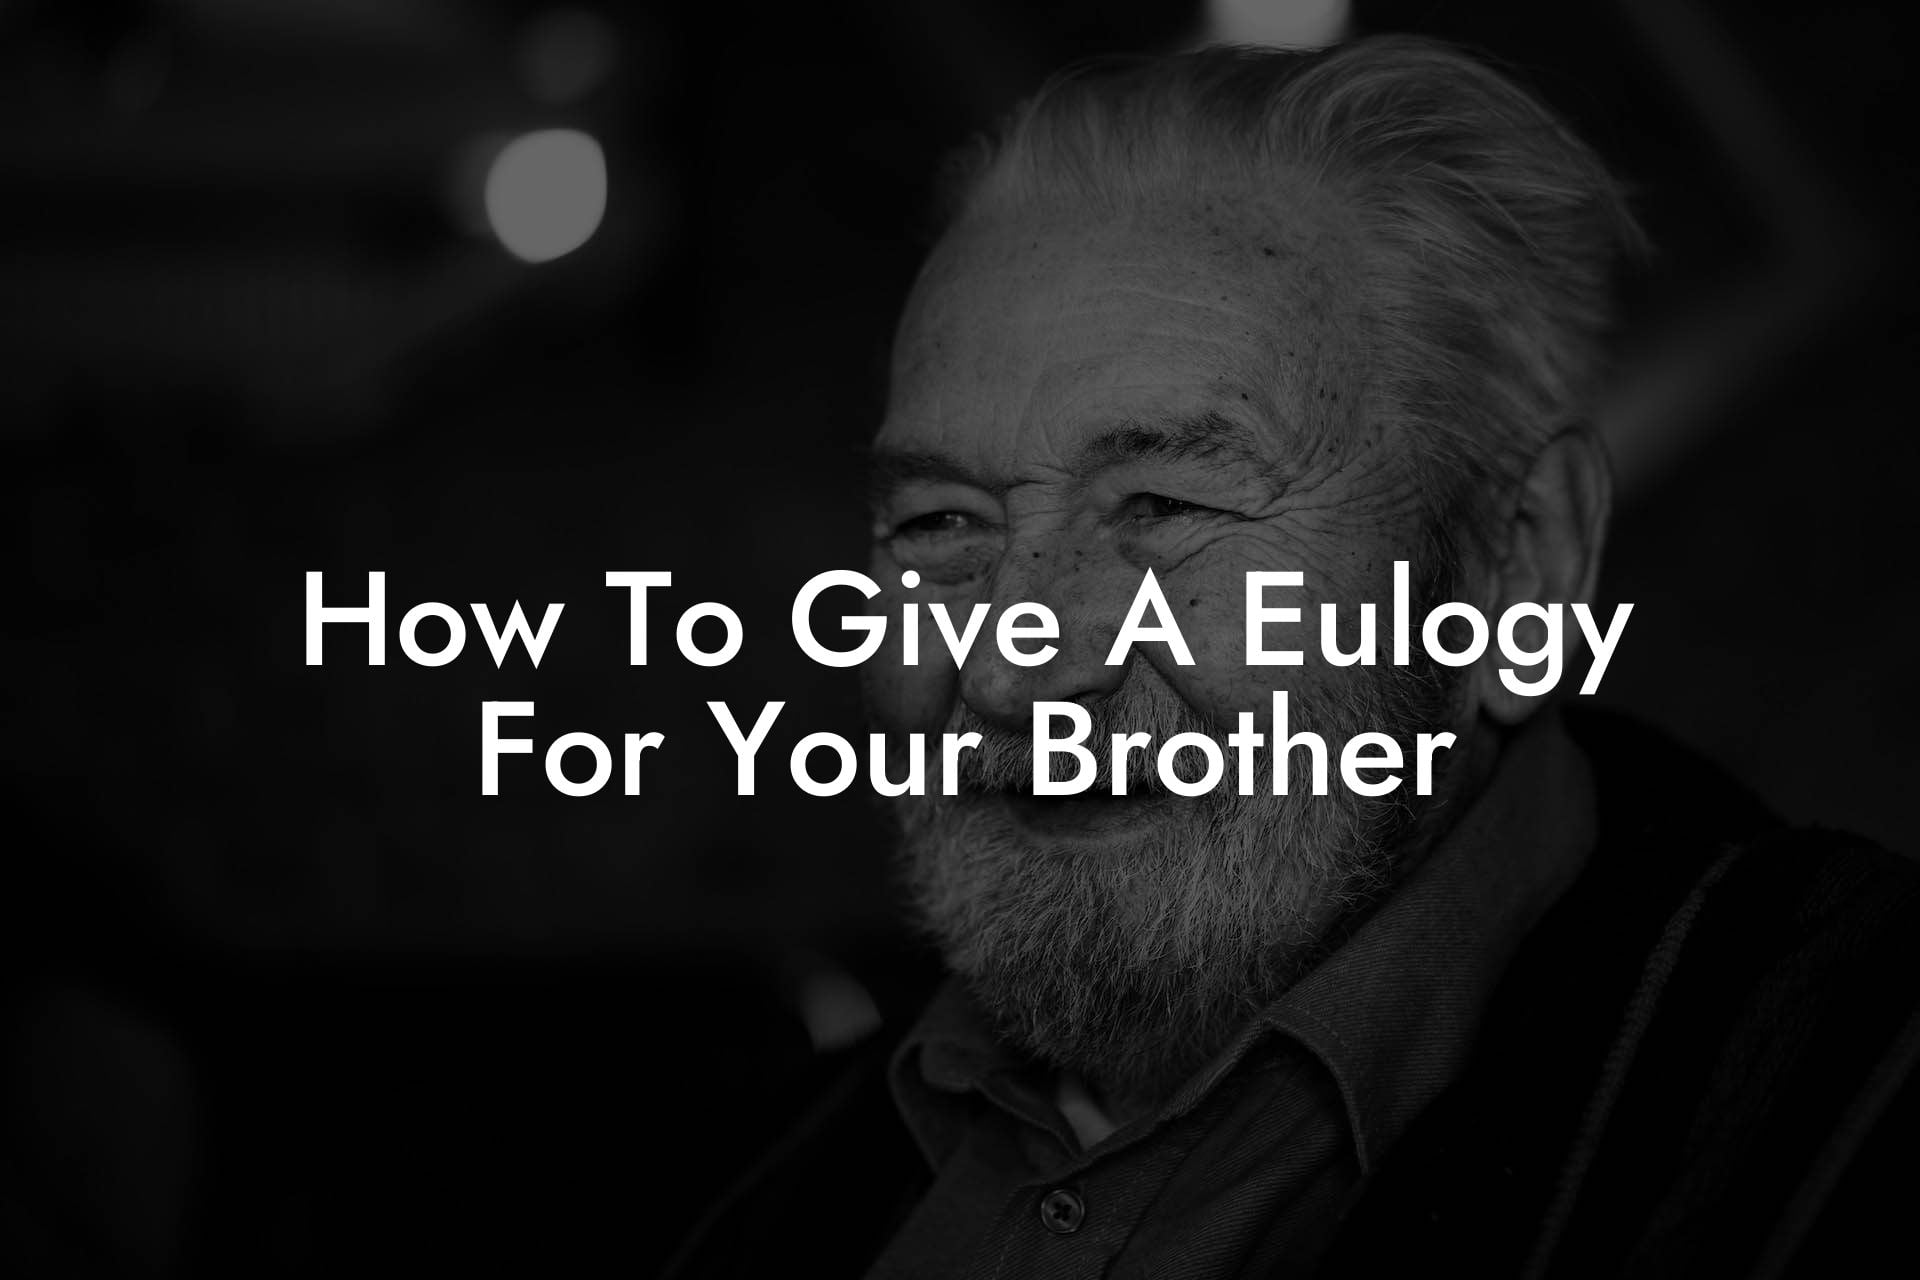 How To Give A Eulogy For Your Brother